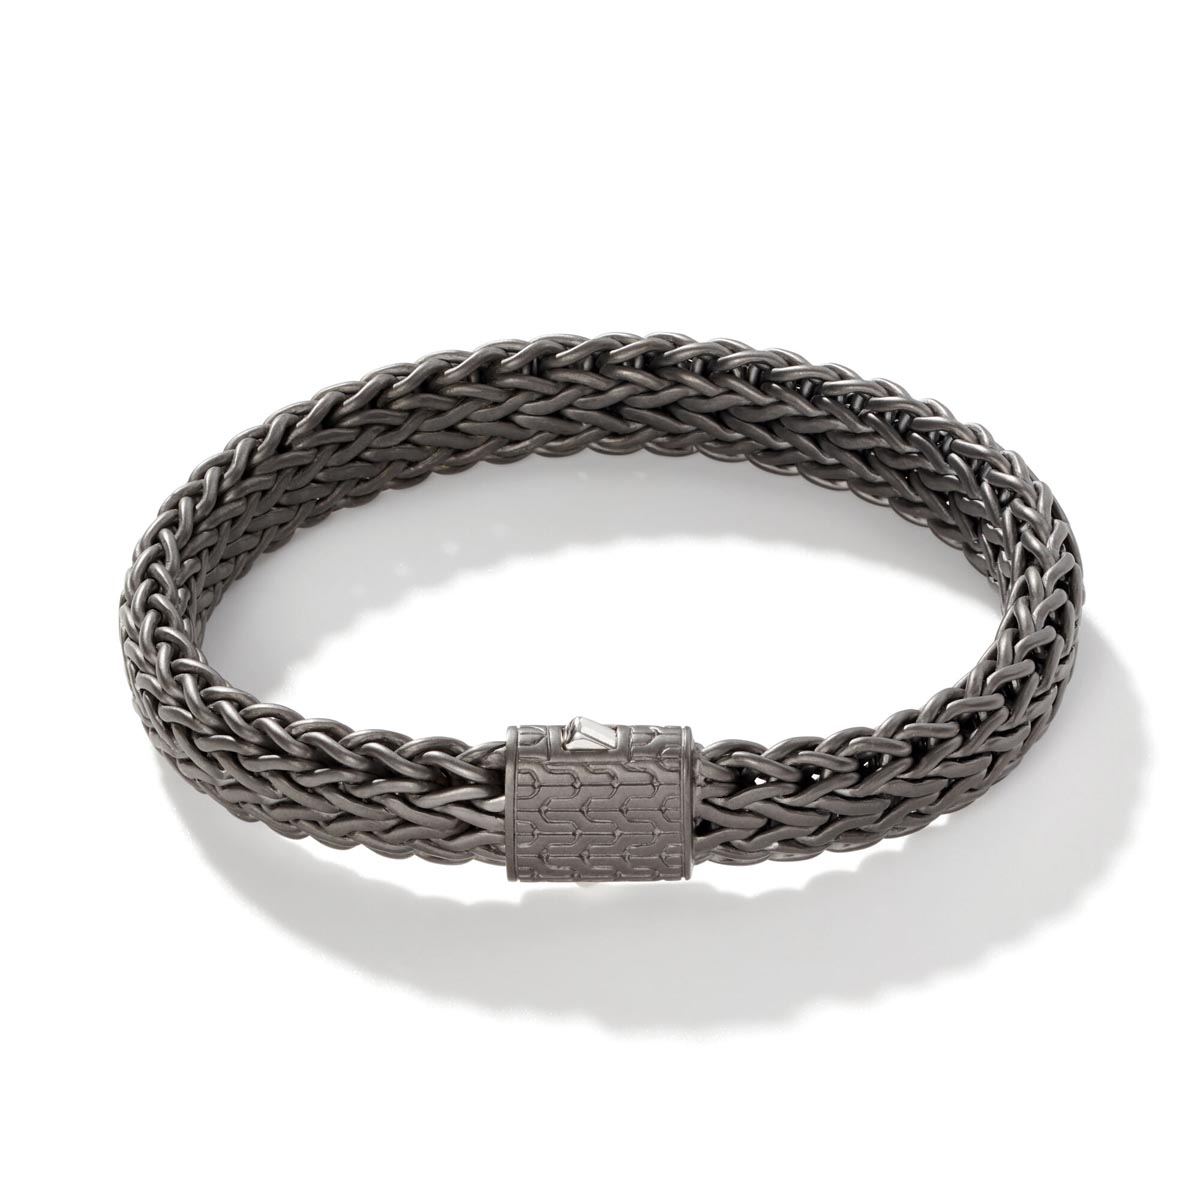 John Hardy Classic Chain Collection Bracelet in Sterling Silver with Matte Black Rhodium